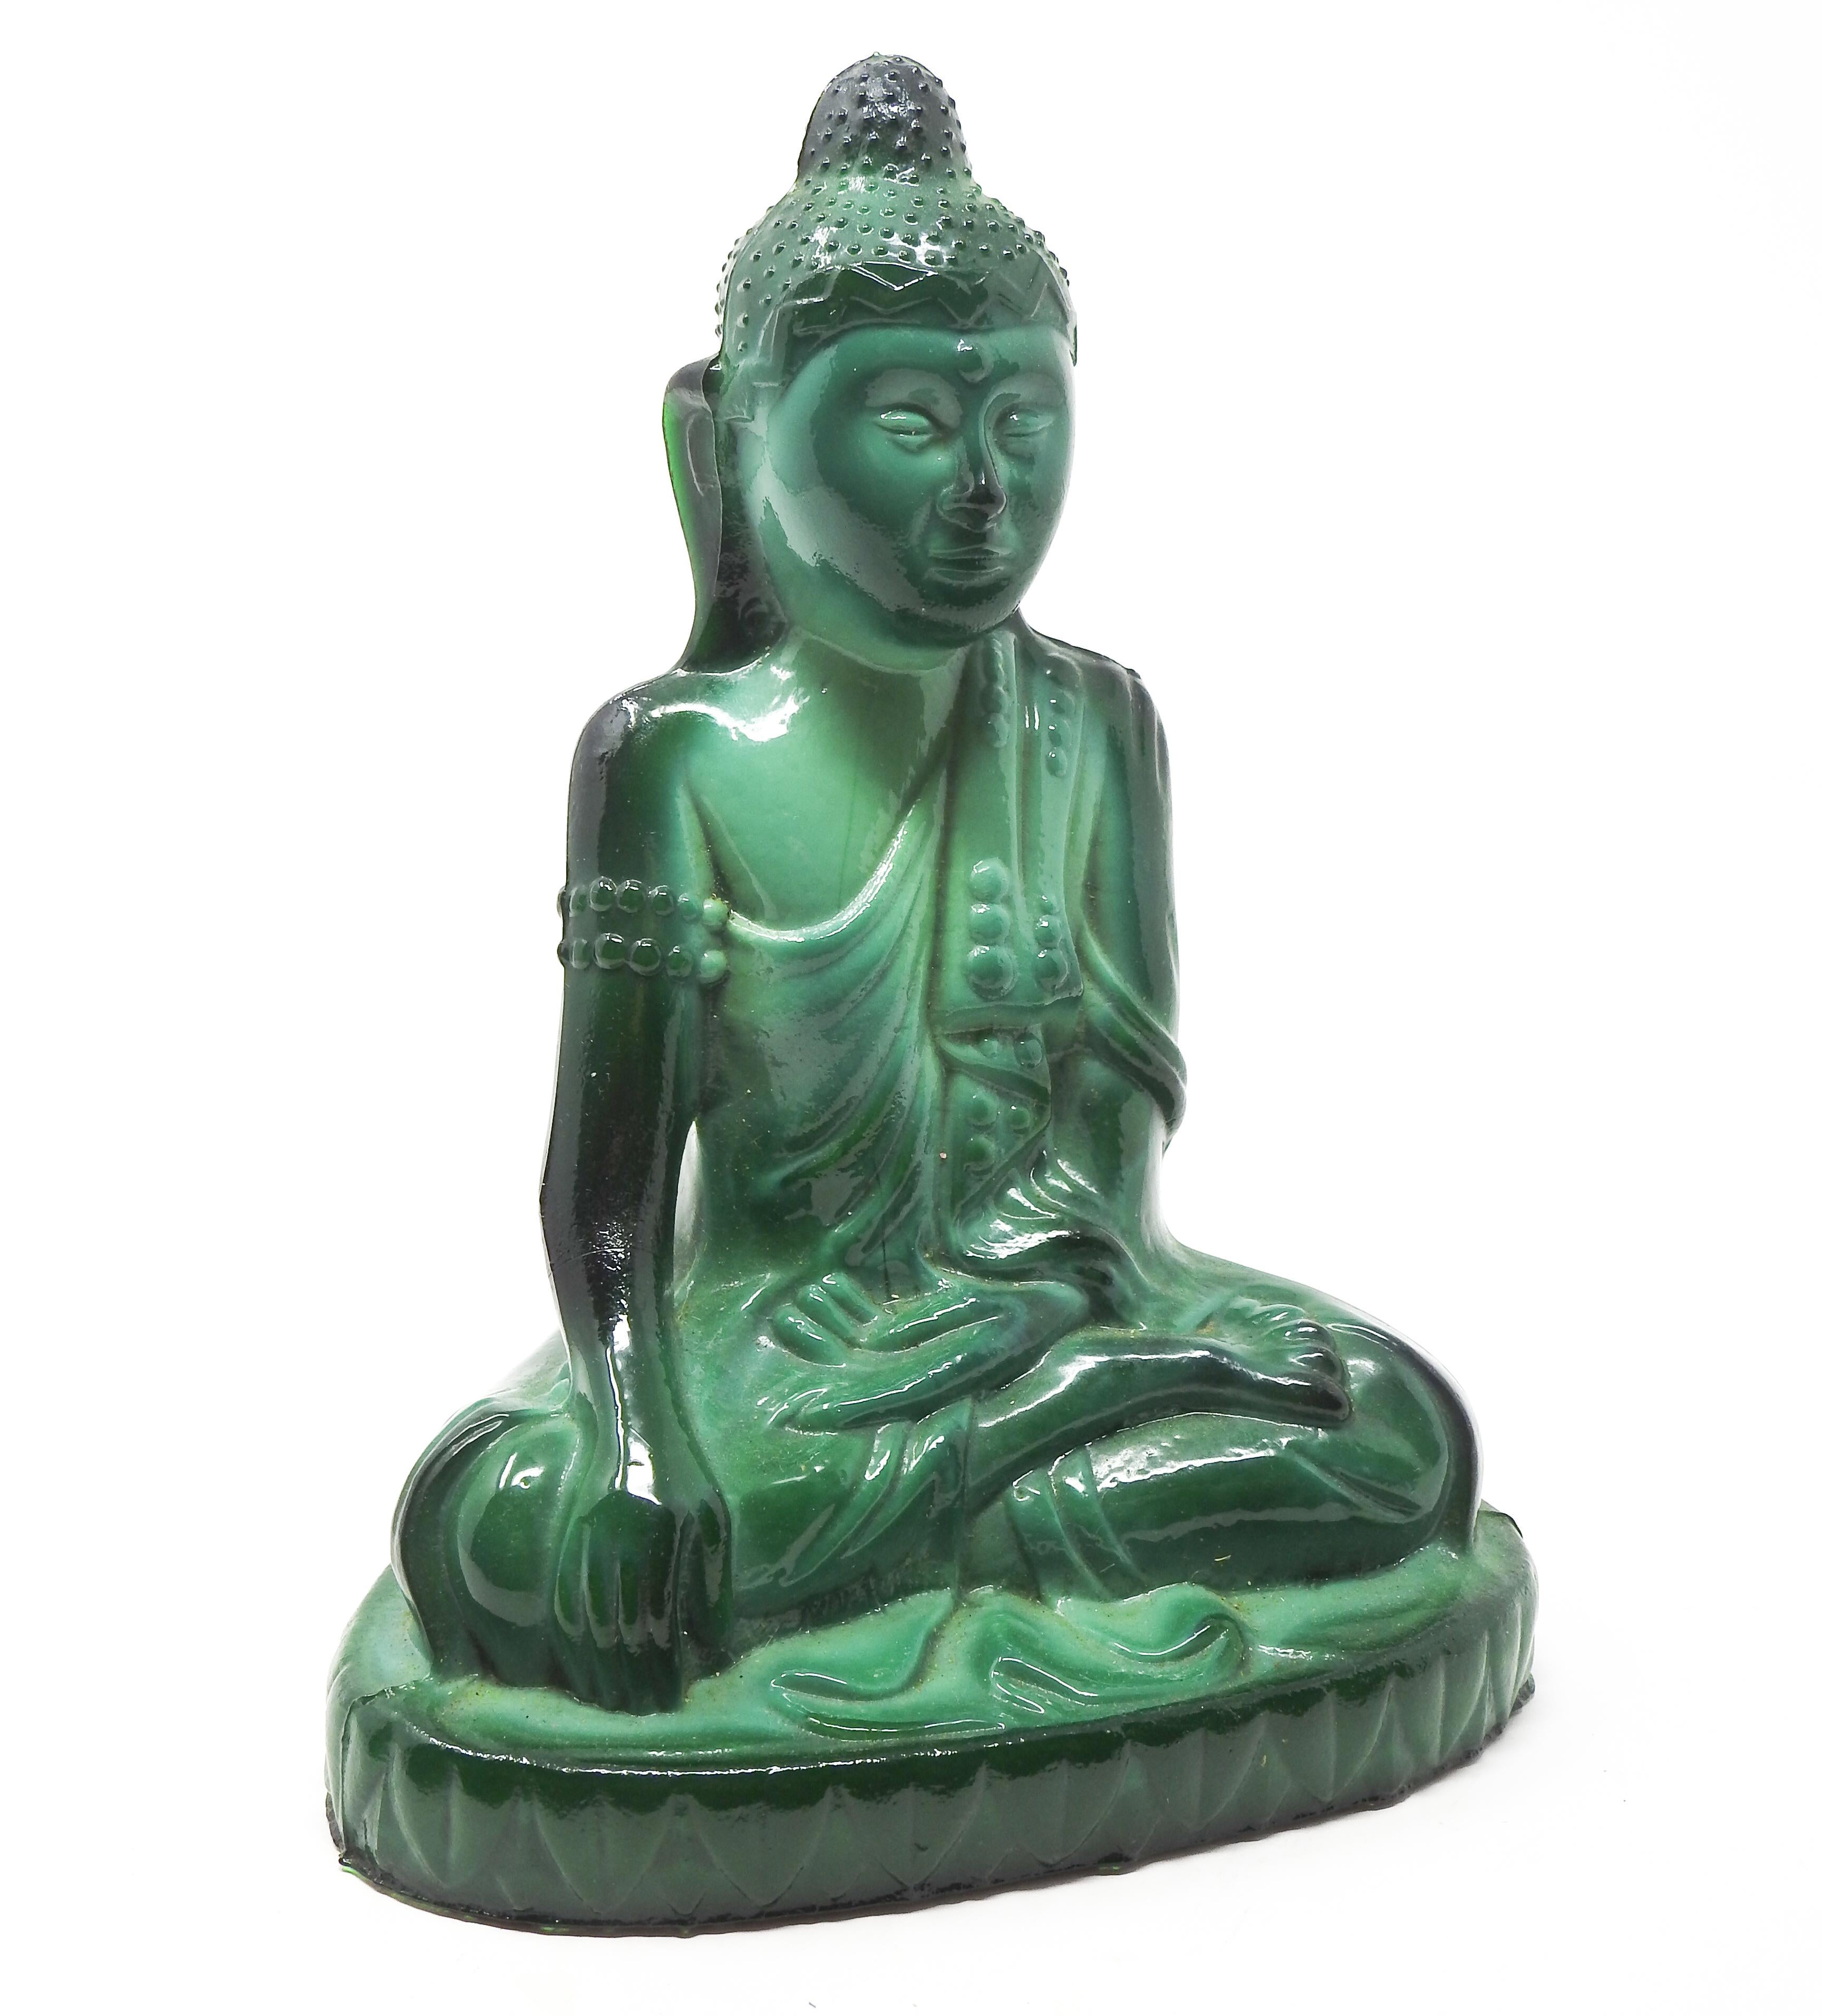 Deco era malachite glass Buddha by Schlevogt from the Ingrid collection. The Buddha is sitting and all the robes and details are gorgeous. Made in Bohemia at the Schlevogt Hoffmann glassworks in the late 1920s-early 1930s.